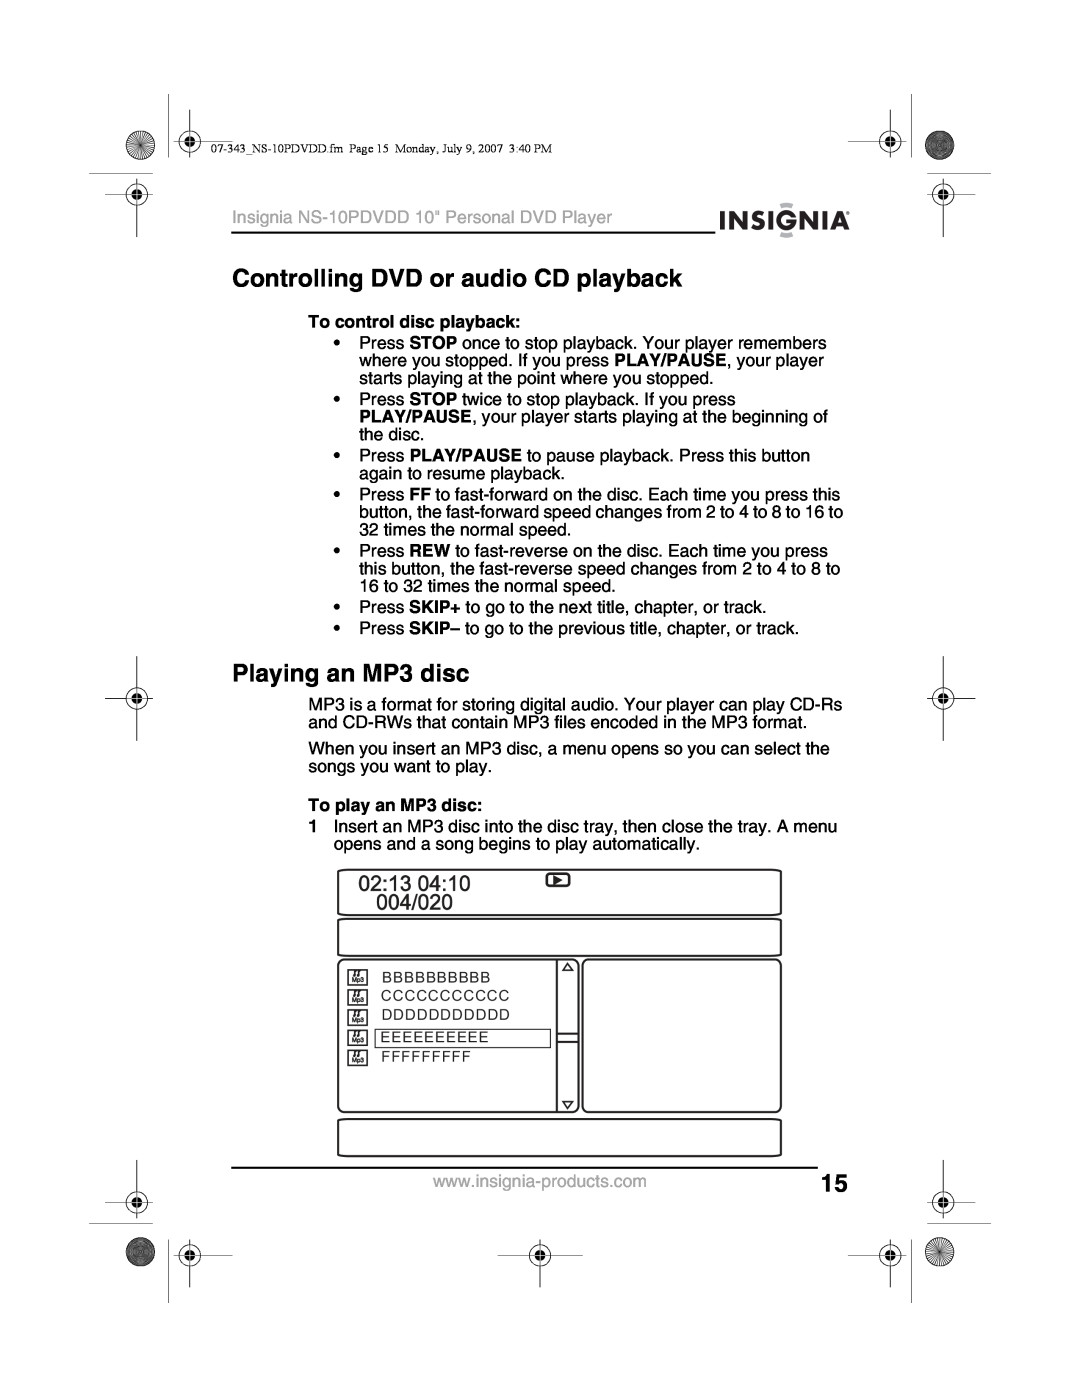 Insignia NS-10PDVDD manual Controlling DVD or audio CD playback, Playing an MP3 disc, To control disc playback 